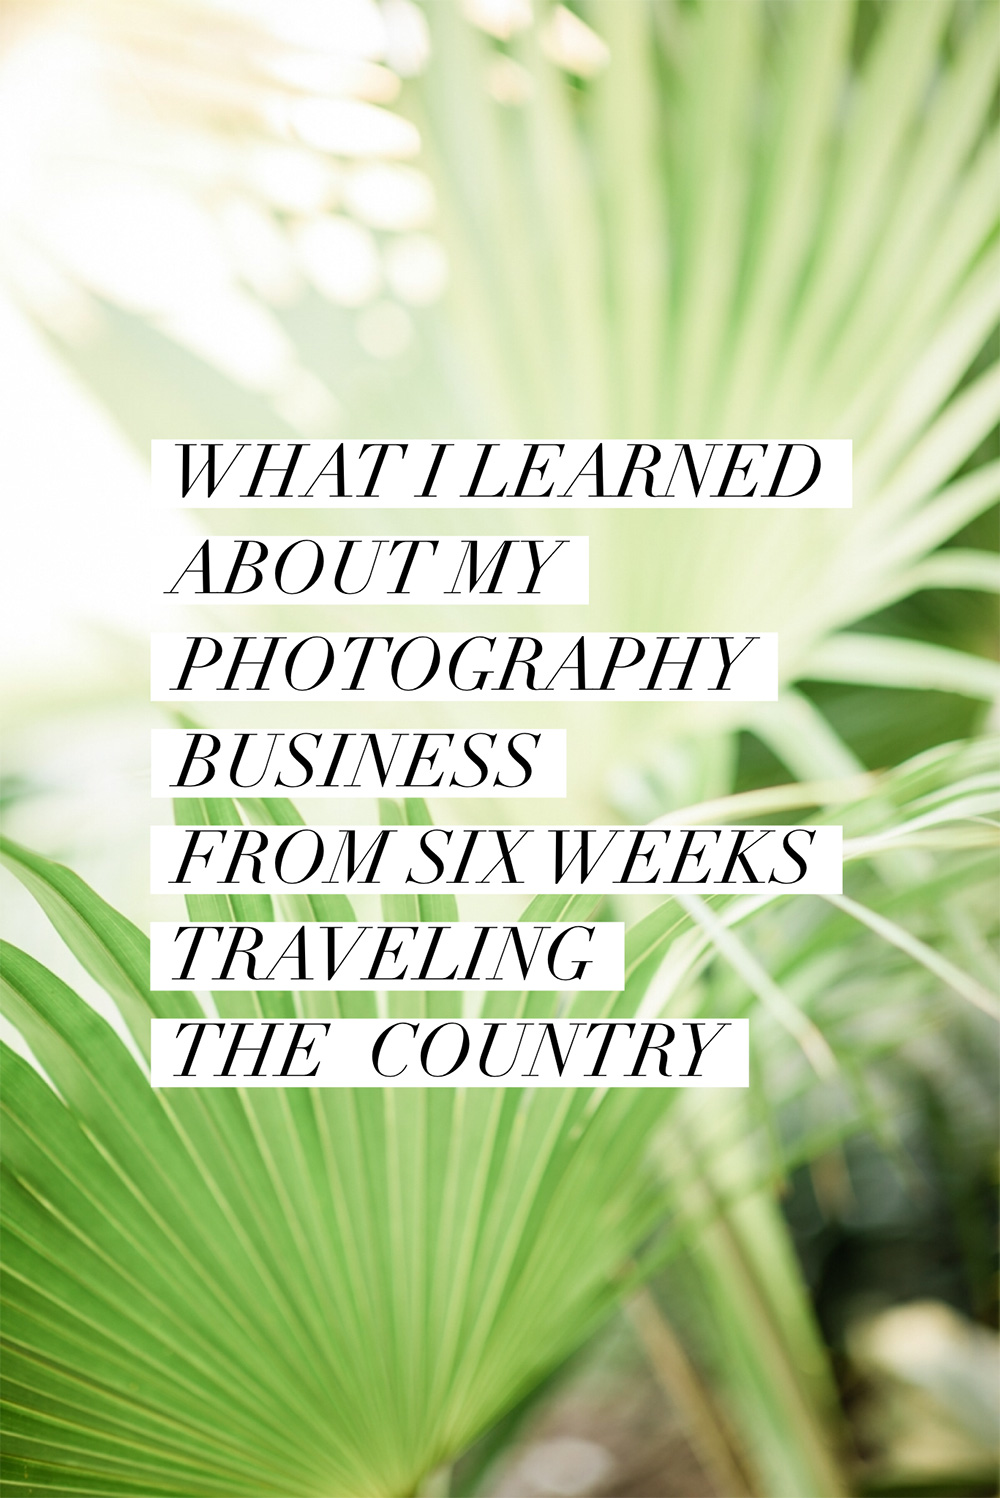 What I learned about my photography business from six weeks traveling the country